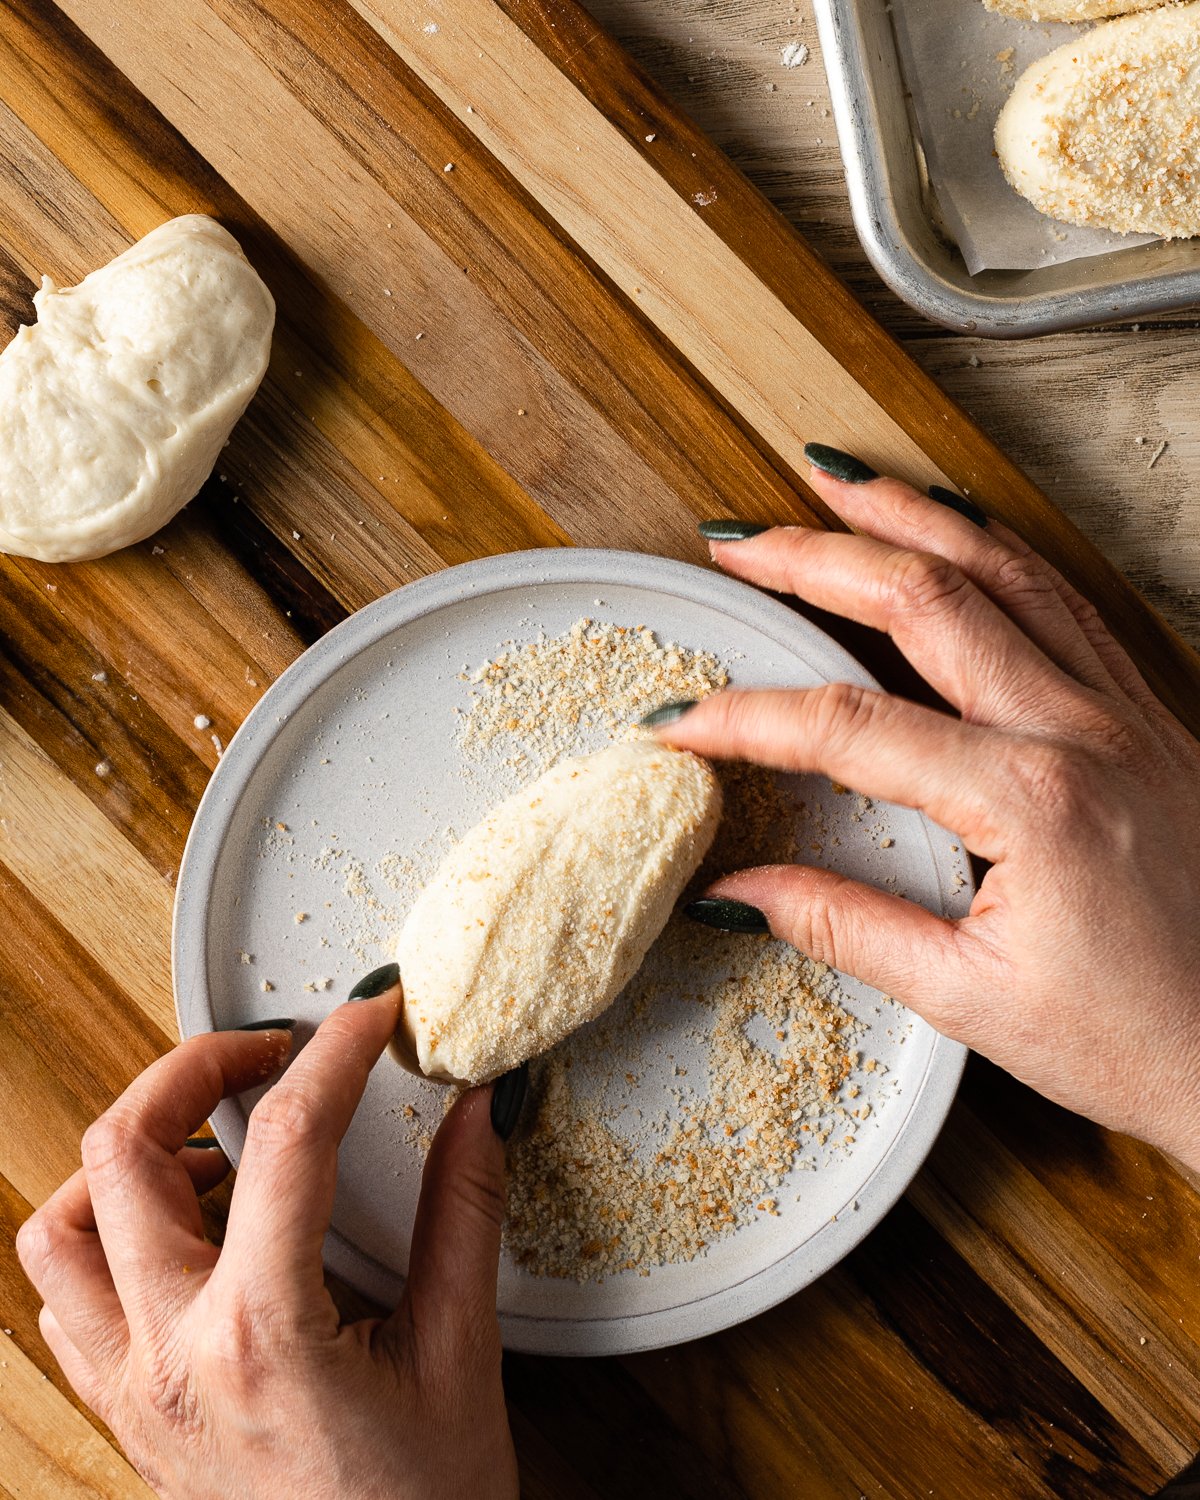 Rolling dough in bread crumbs on a plate